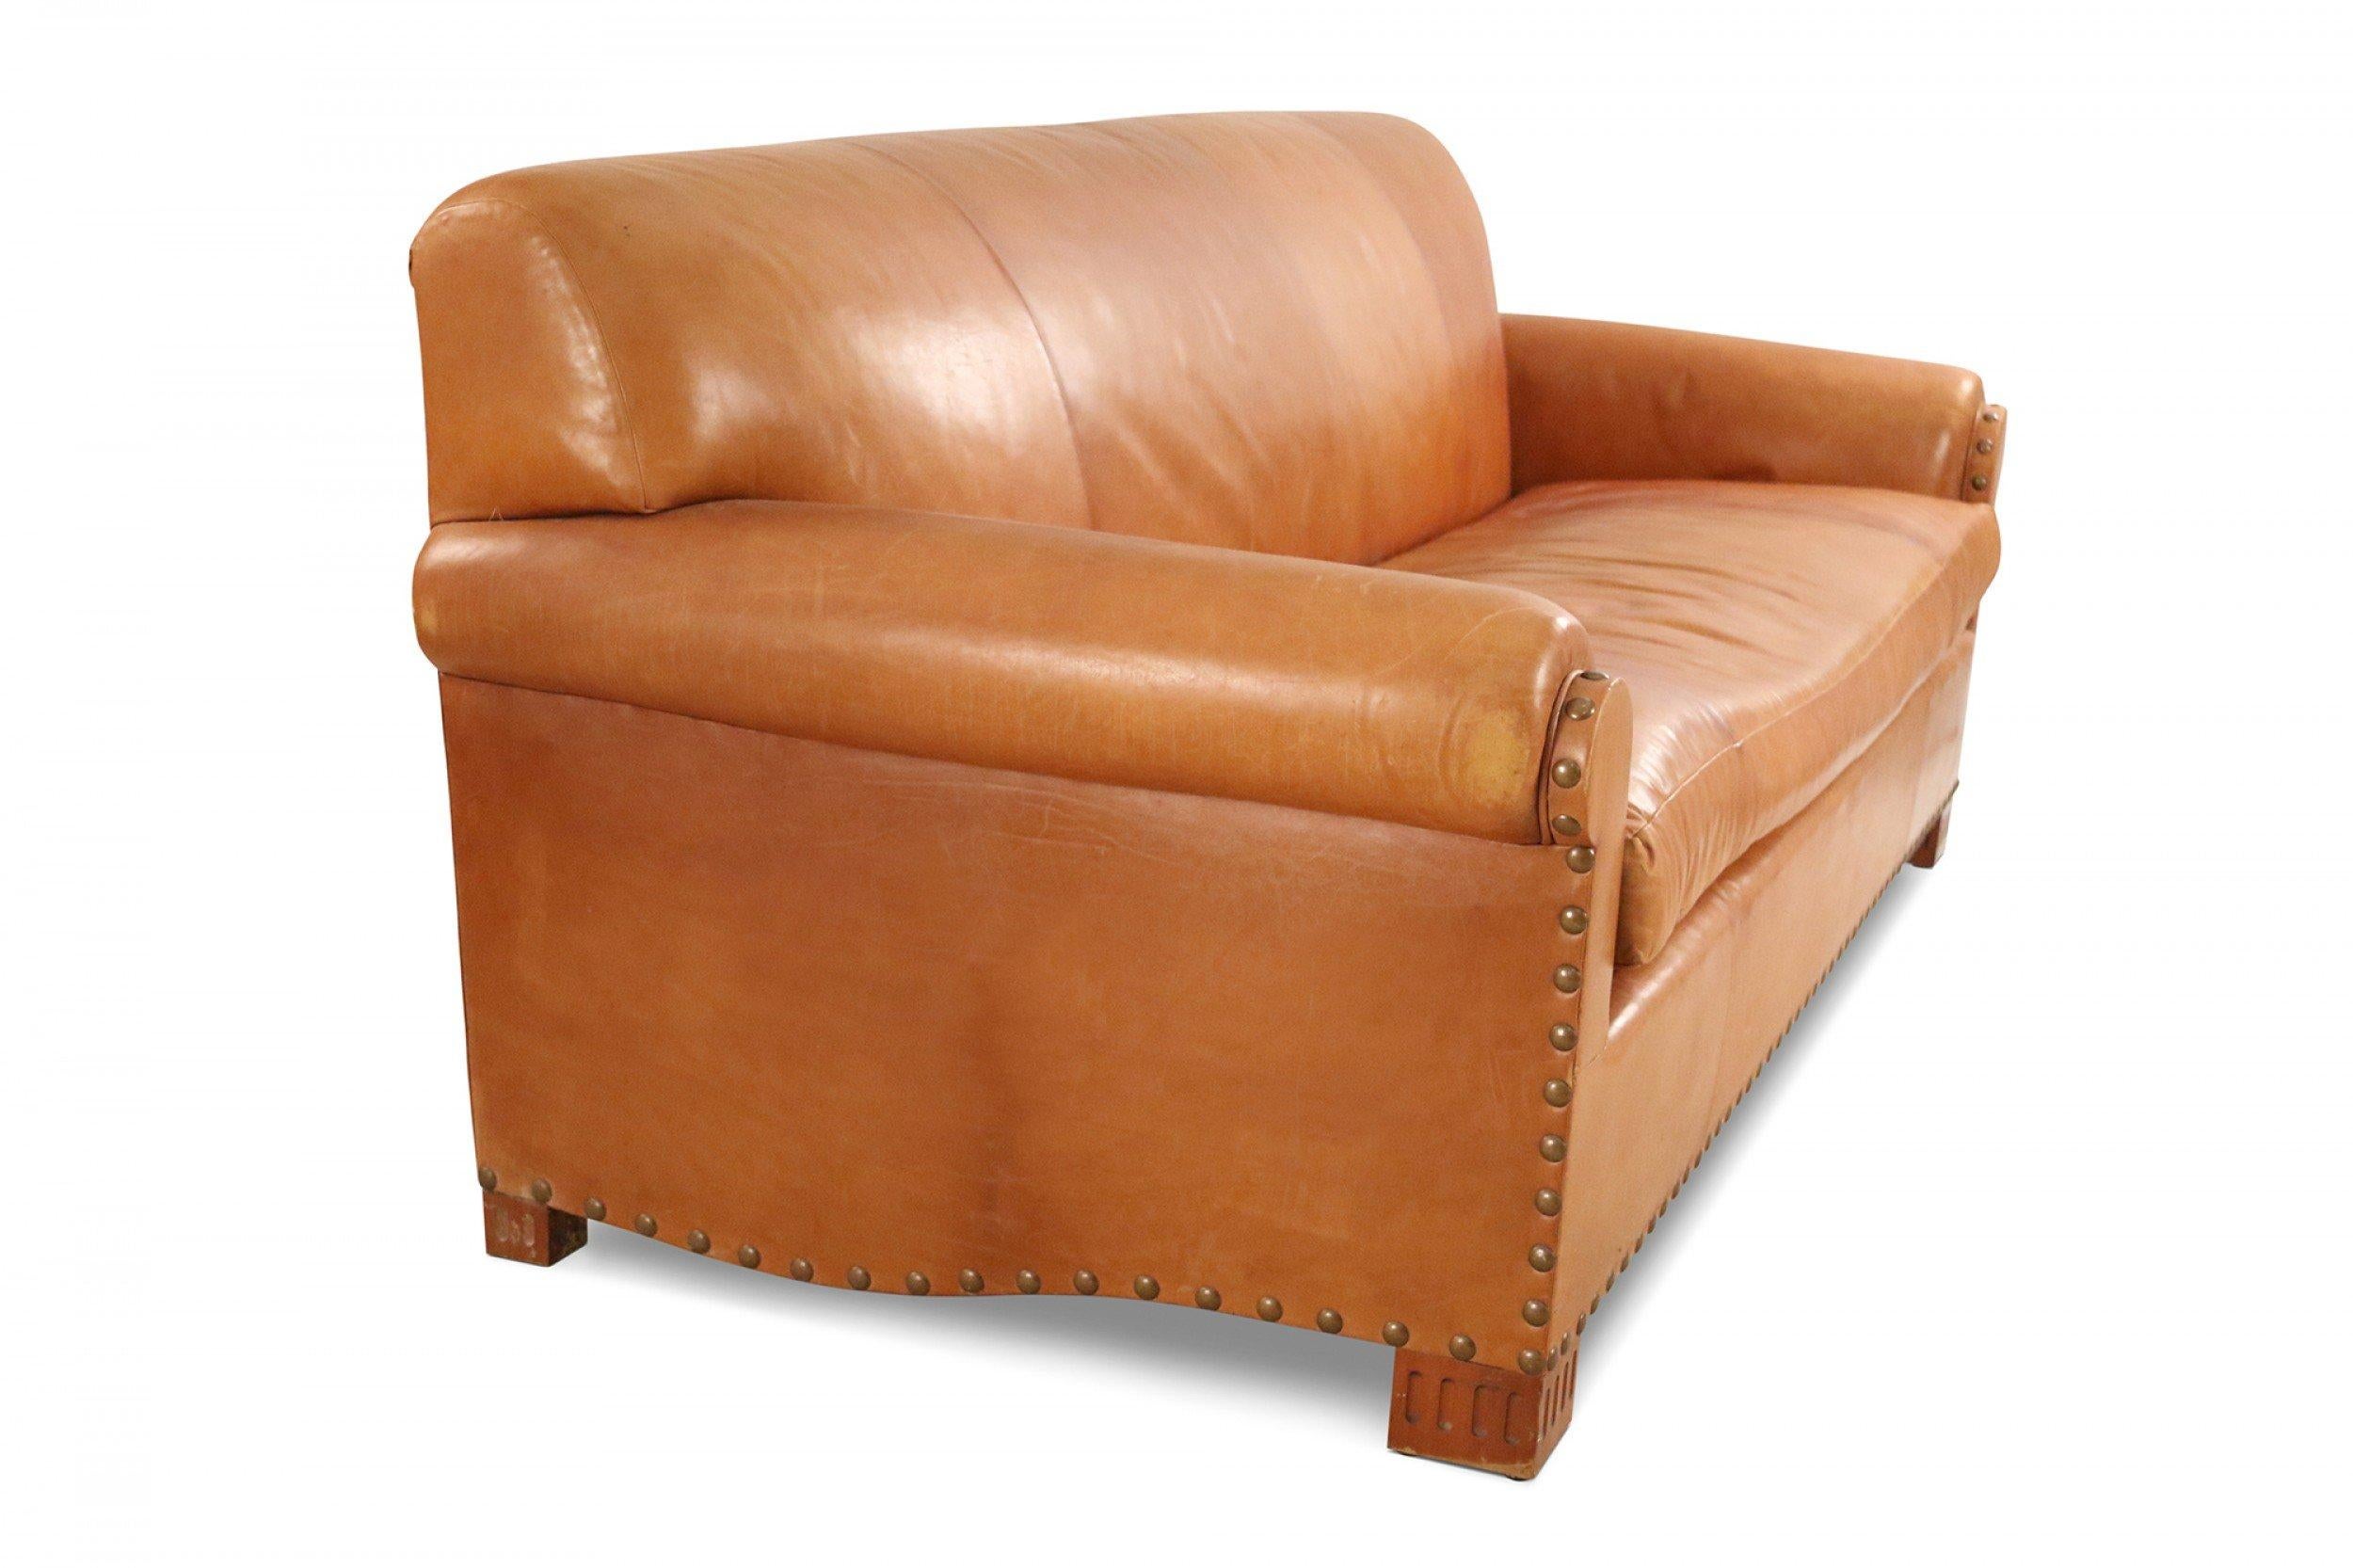 Contemporary caramel brown leather 3-seat sofa with brass upholstery nail trim, removable single cushion seat with square wooden legs.